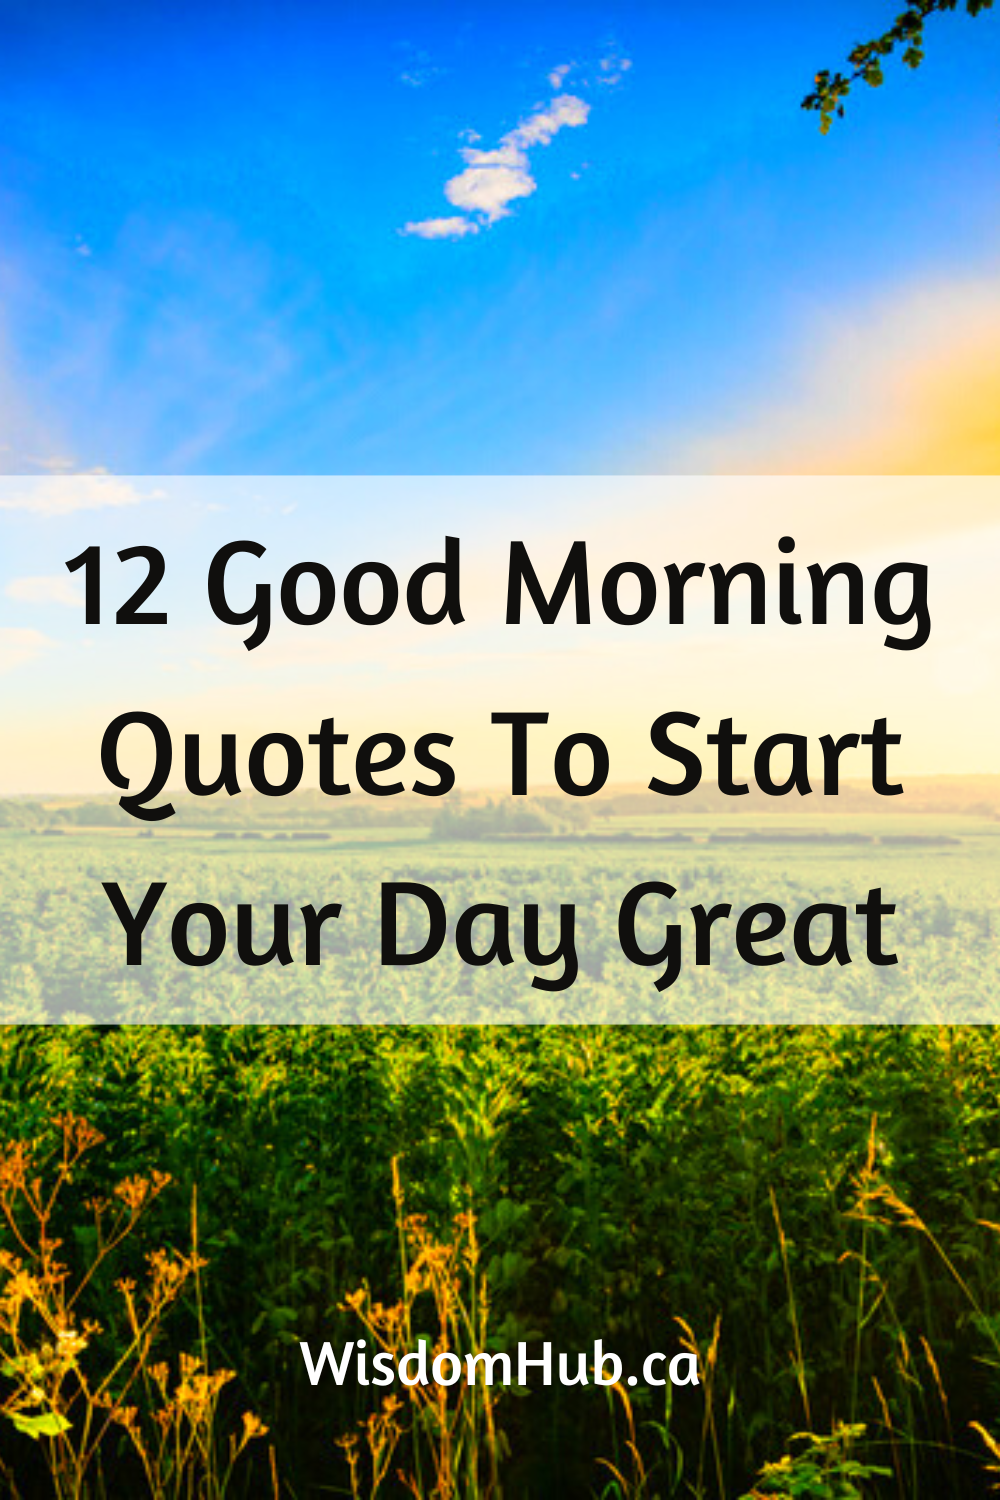 12 Good Morning Quotes To Start Your Day Great – WisdomHub